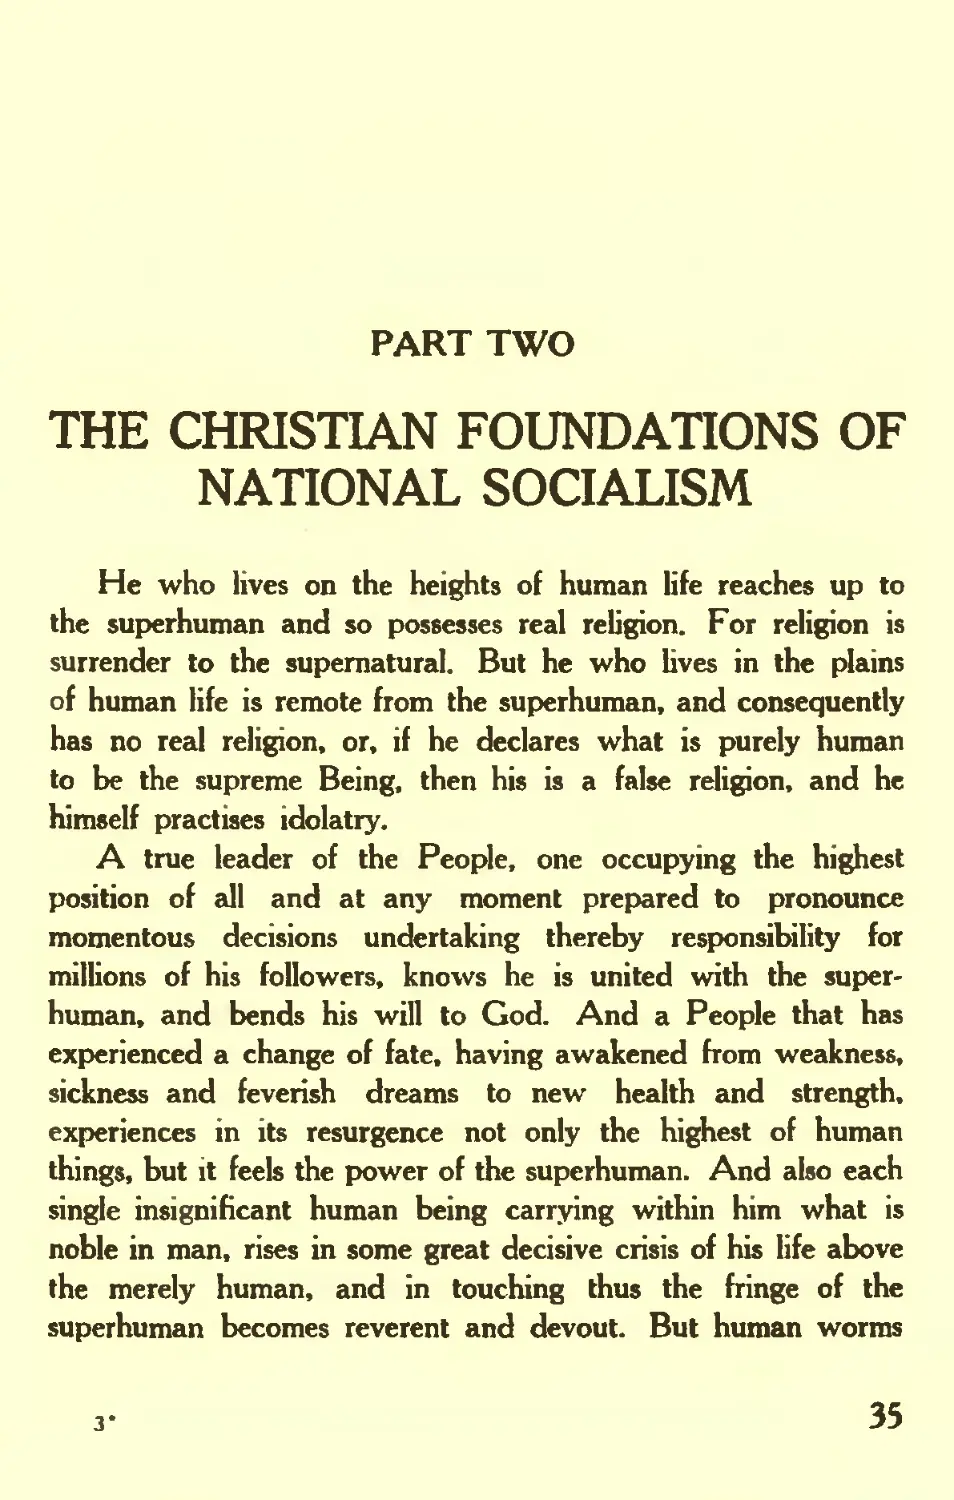 PART TWO: THE CHRISTIAN FOUNDATIONS OF NATIONAL SOCIALISM